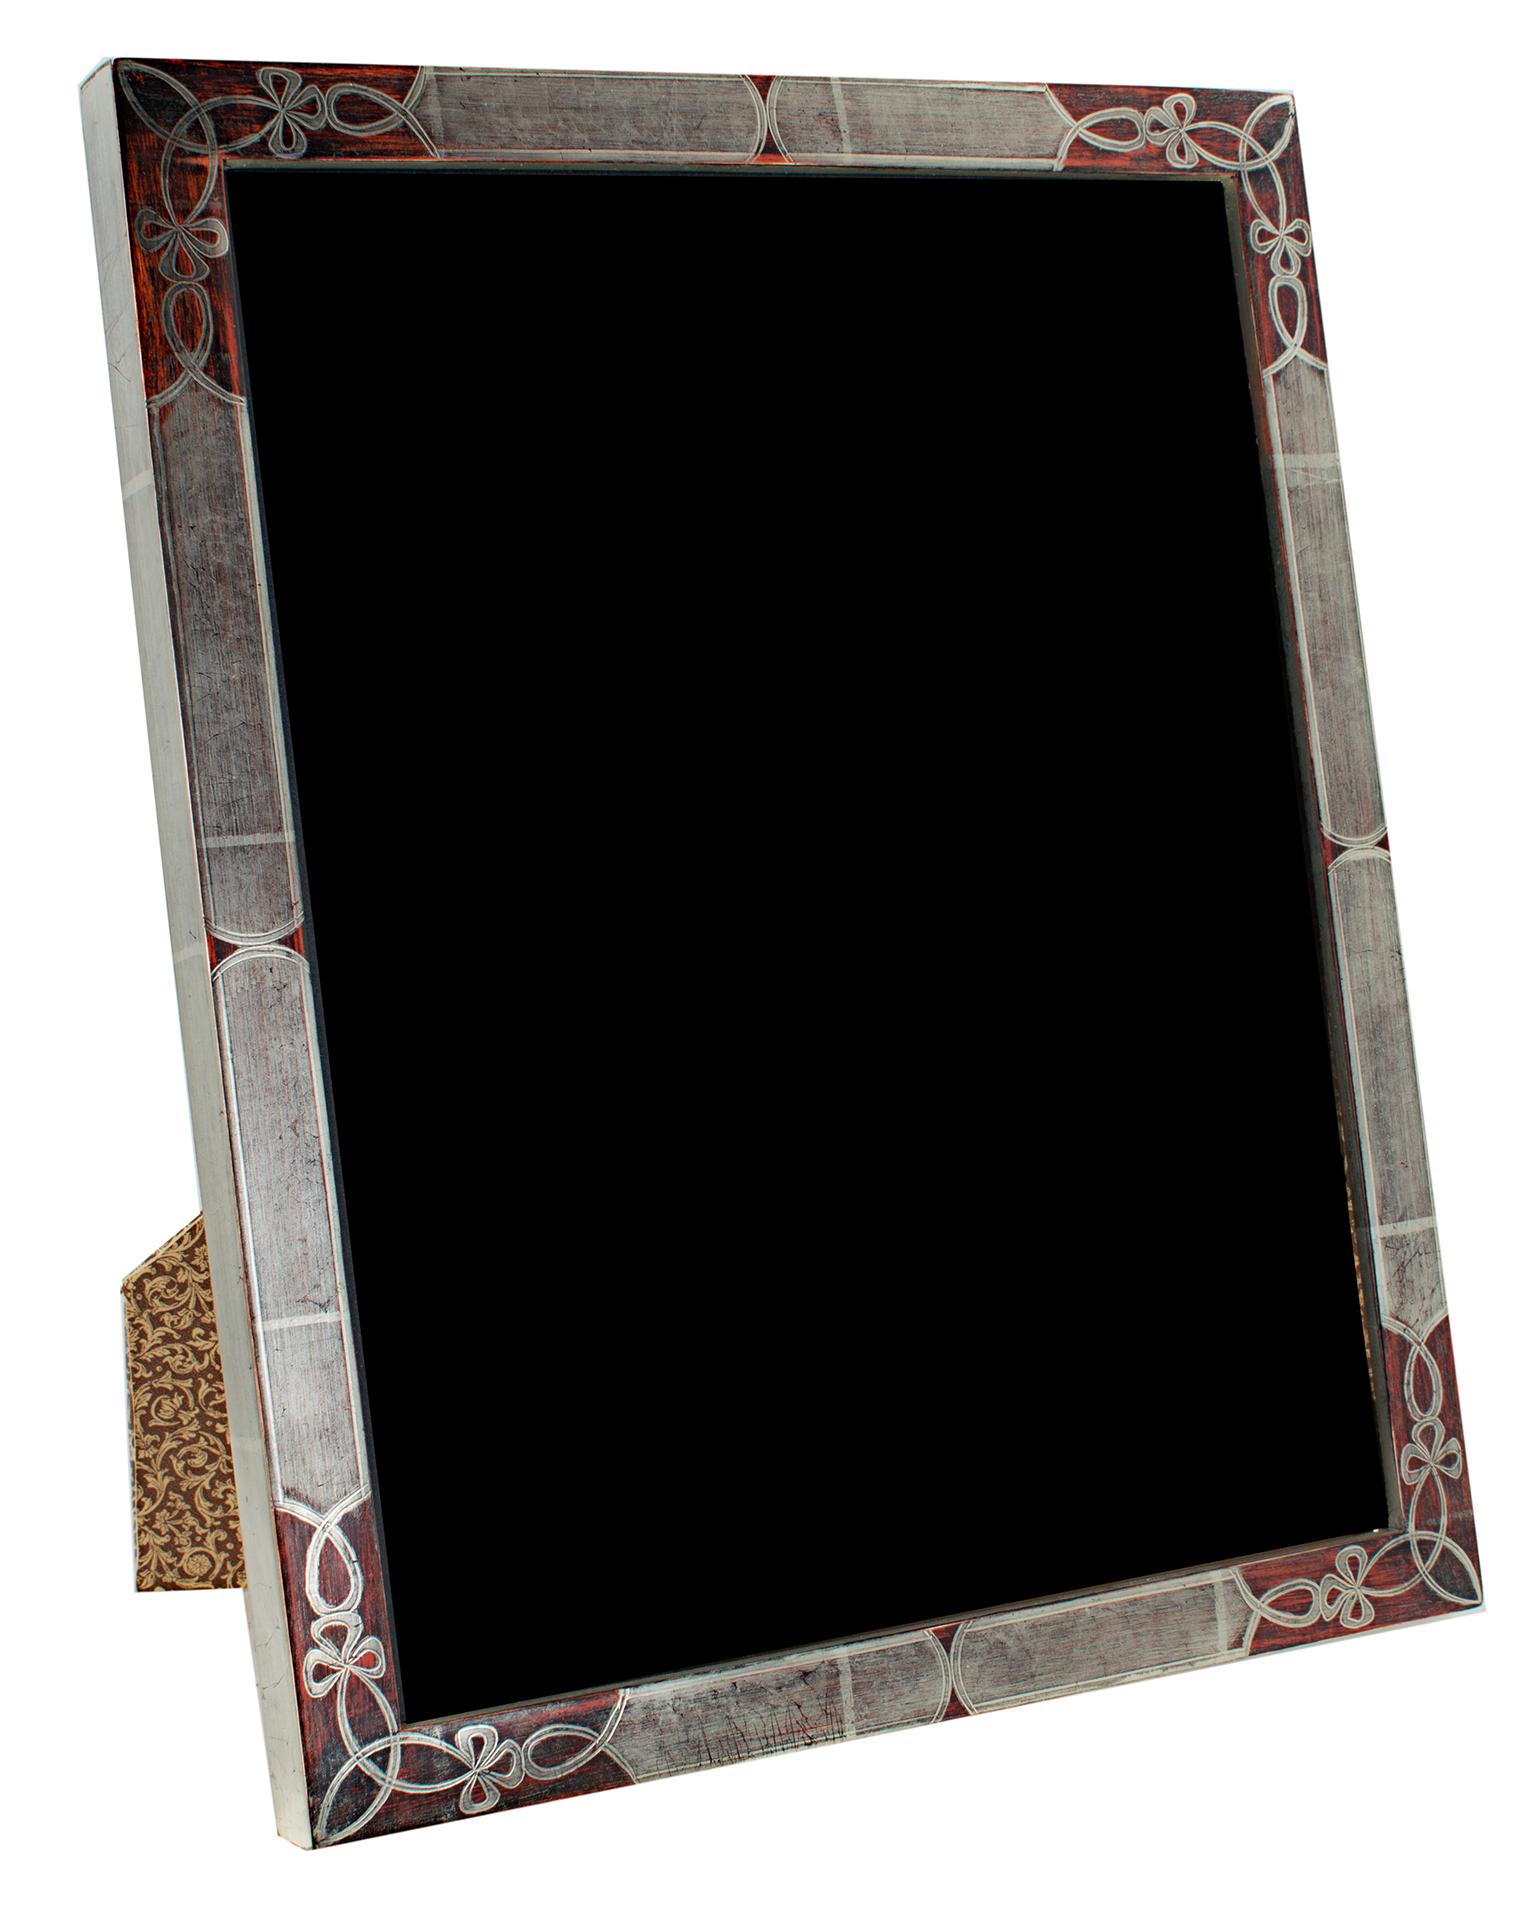 "Romanian Handmade Photo Frame, " 12K White Gold Leaf & Wood 8 x 10 in Frame - Art by Unknown